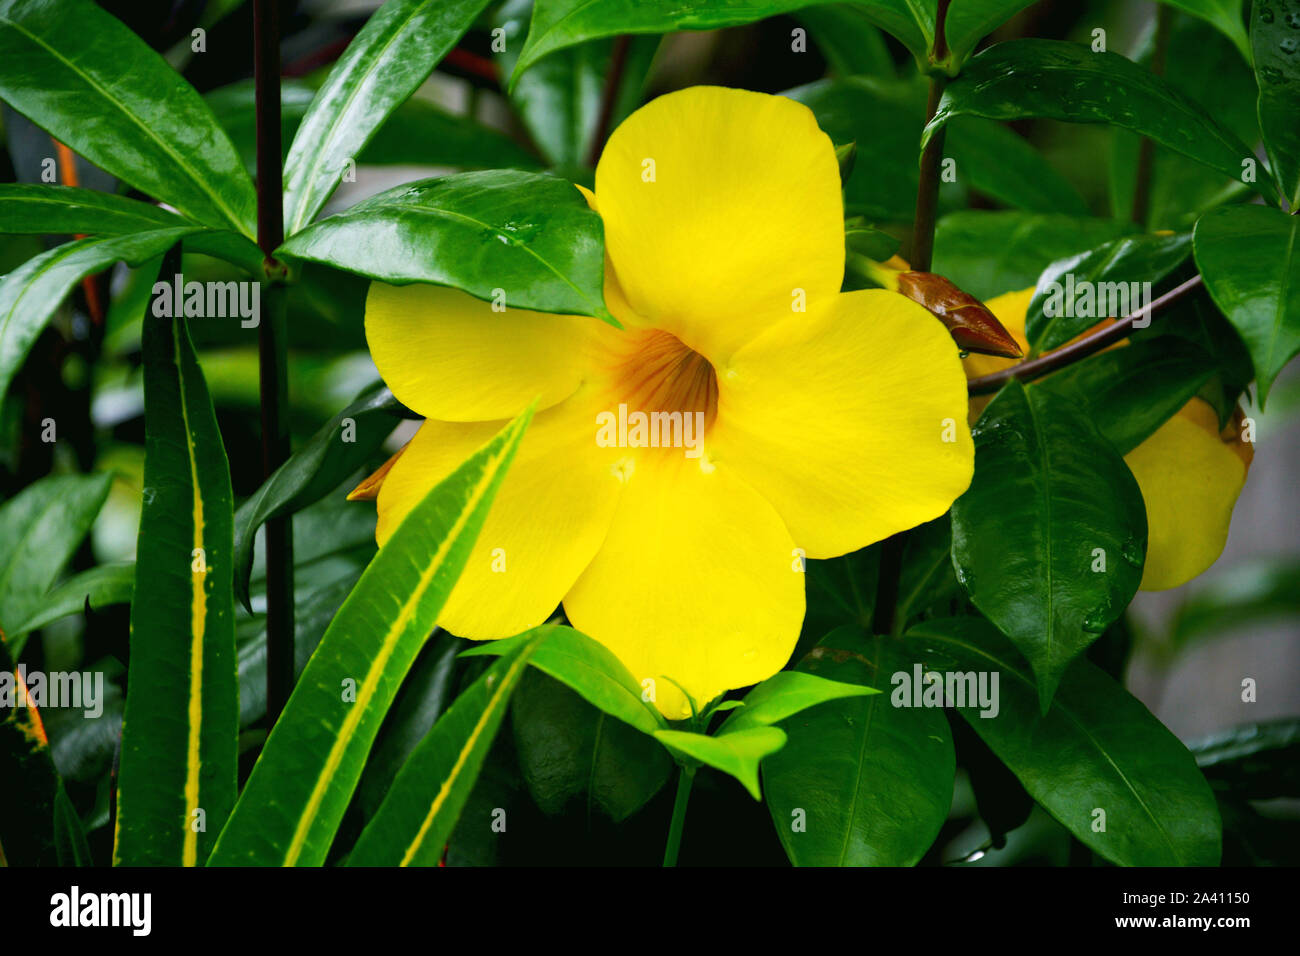 Close up of Sundaville Mandevilla Zolta BloomBells Yellow, plants with yellow flowers and green leaves also known as Allamanda, Indian Shrub Stock Photo